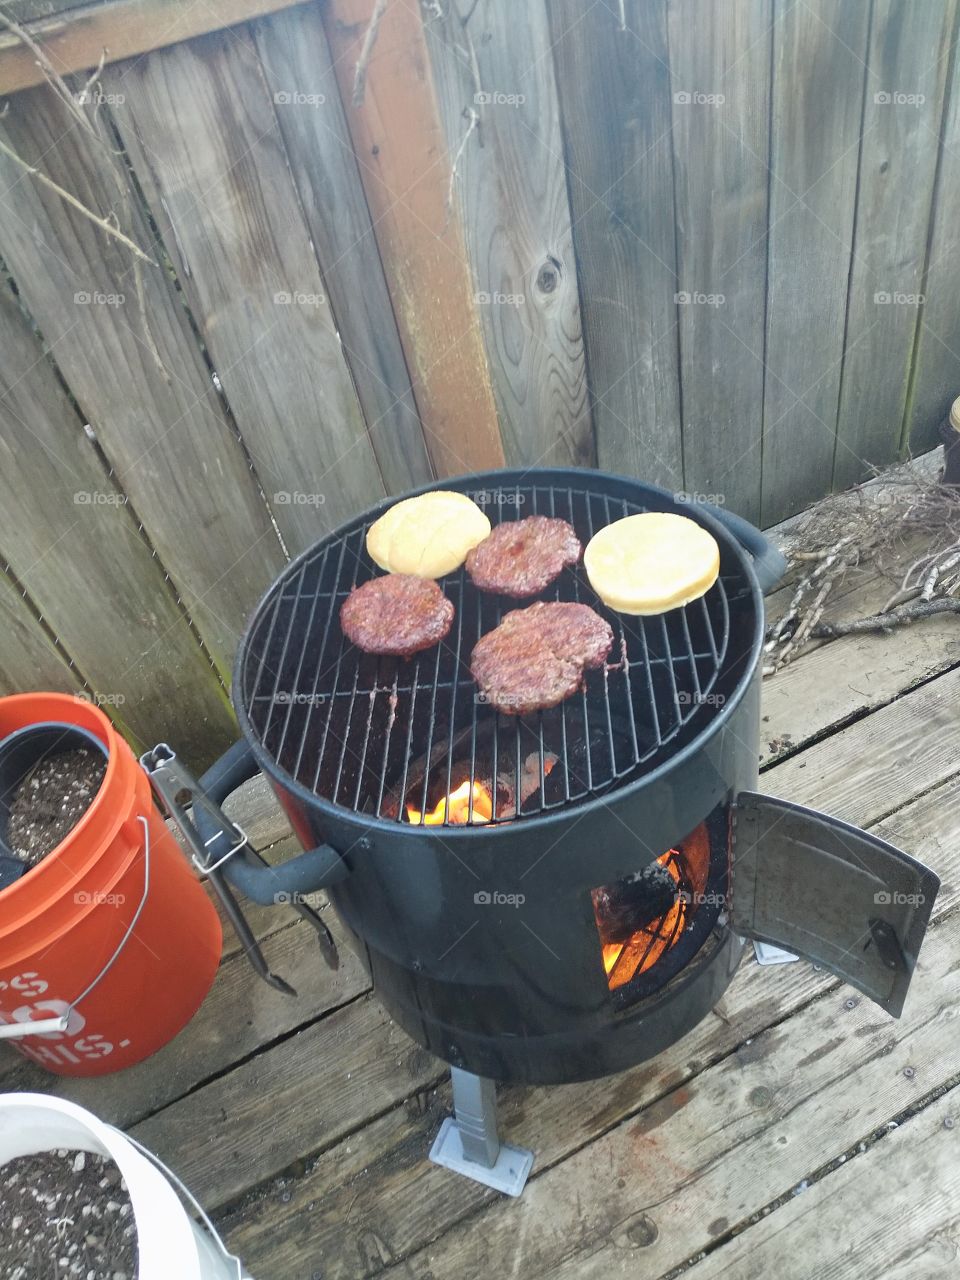 A photo of me grilling burgers on my back deck, remember, any sunny day can be made better with a home barbeque